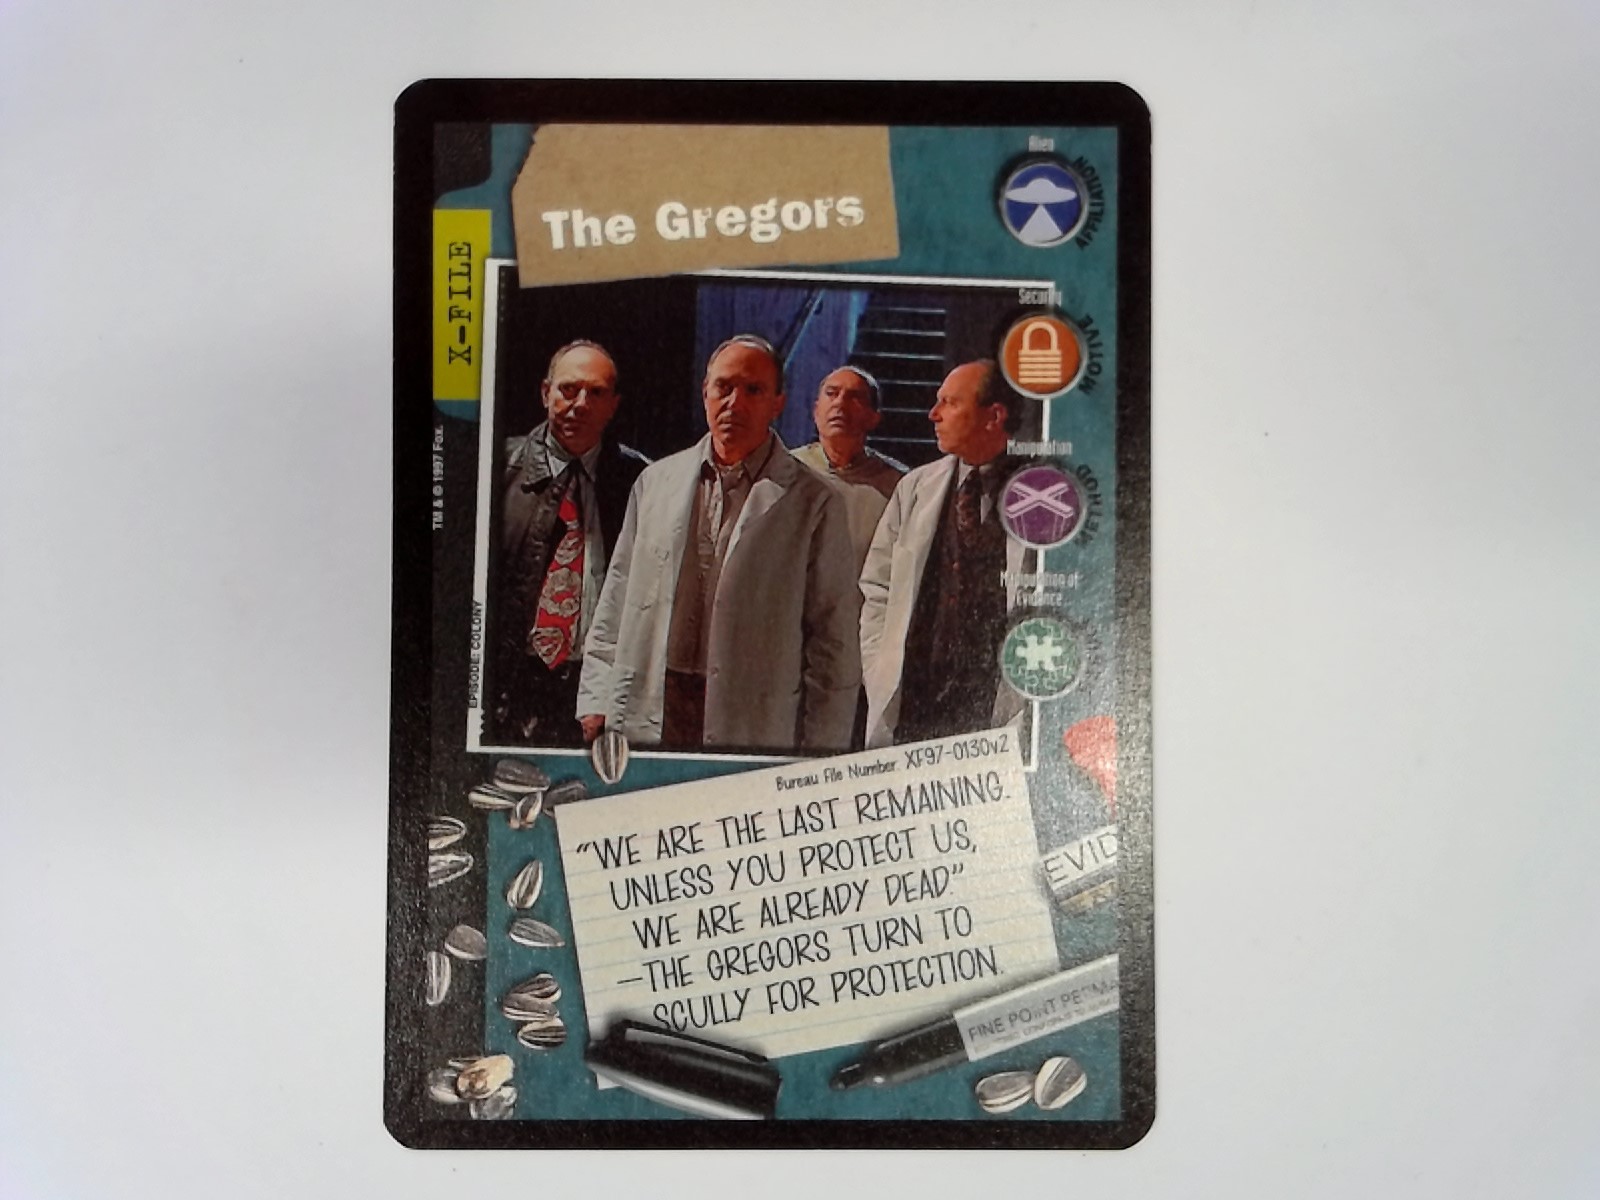 The X-Files CCG TTIOT The Gregors XF97-0130v2 Missing Card / Promo Card